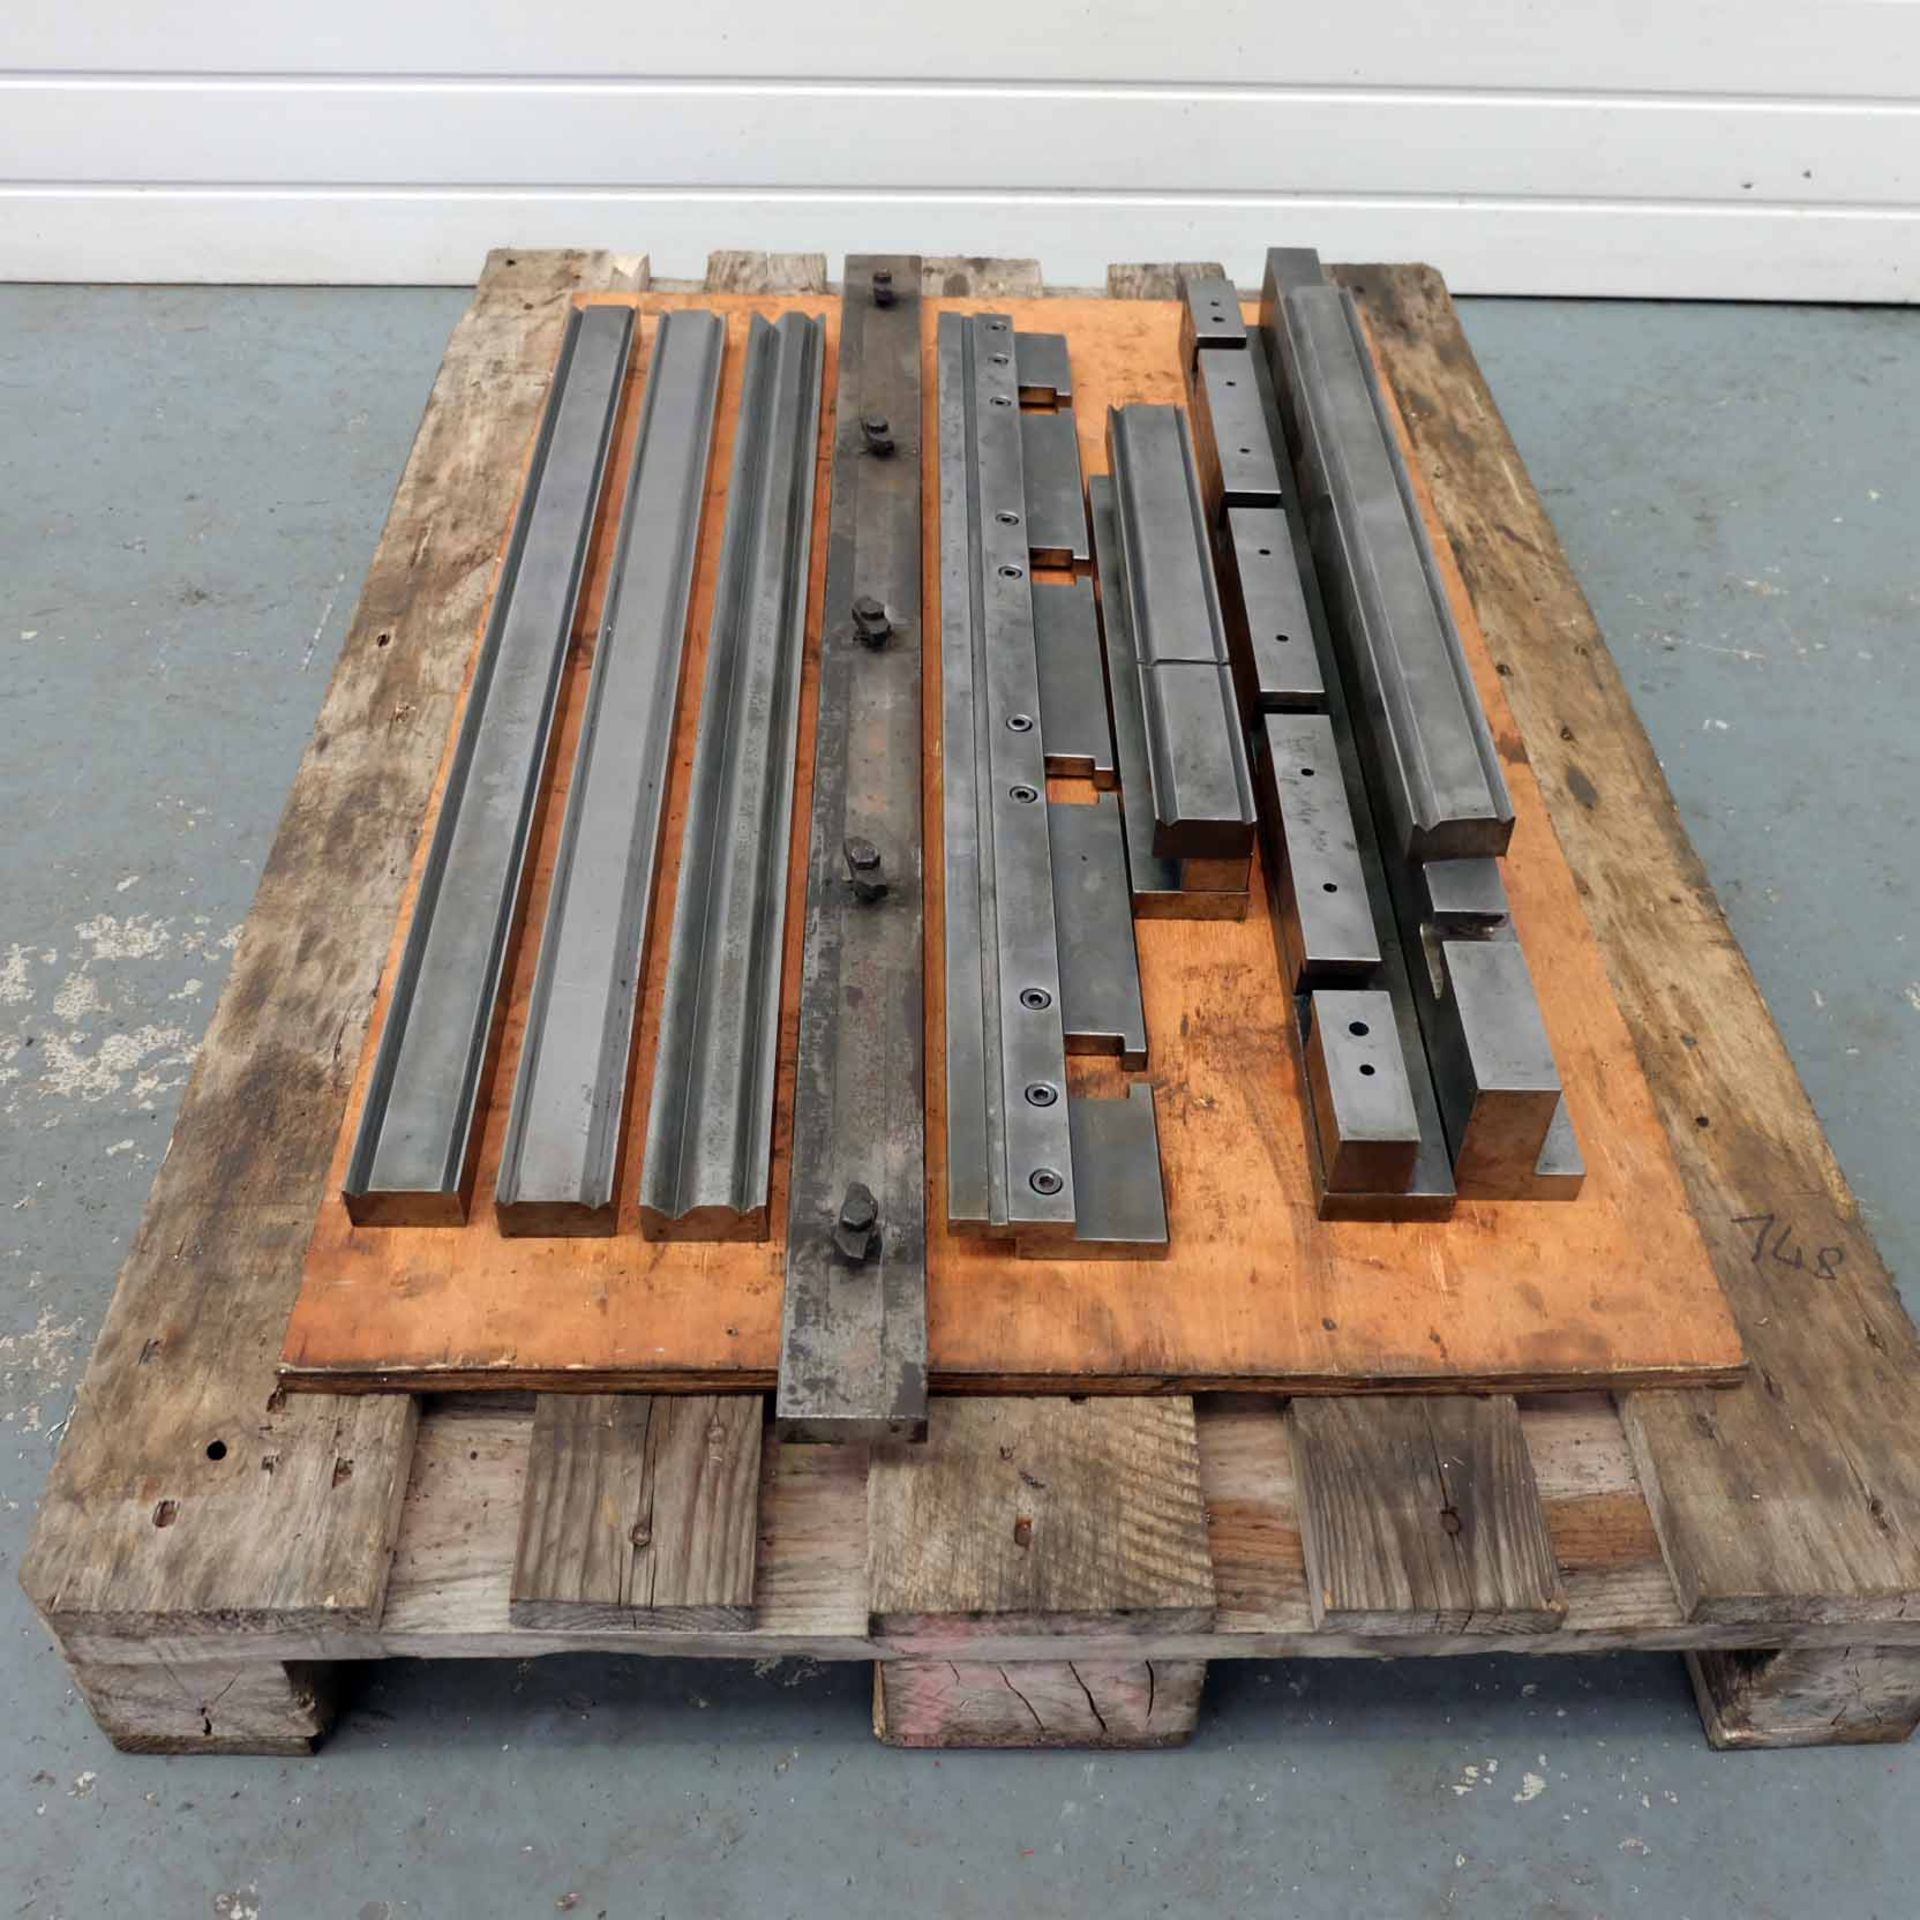 Quantity of Bottom Press Brake Tooling. Clamp Bases, Clamps & Double Vee Tools. - Image 2 of 6